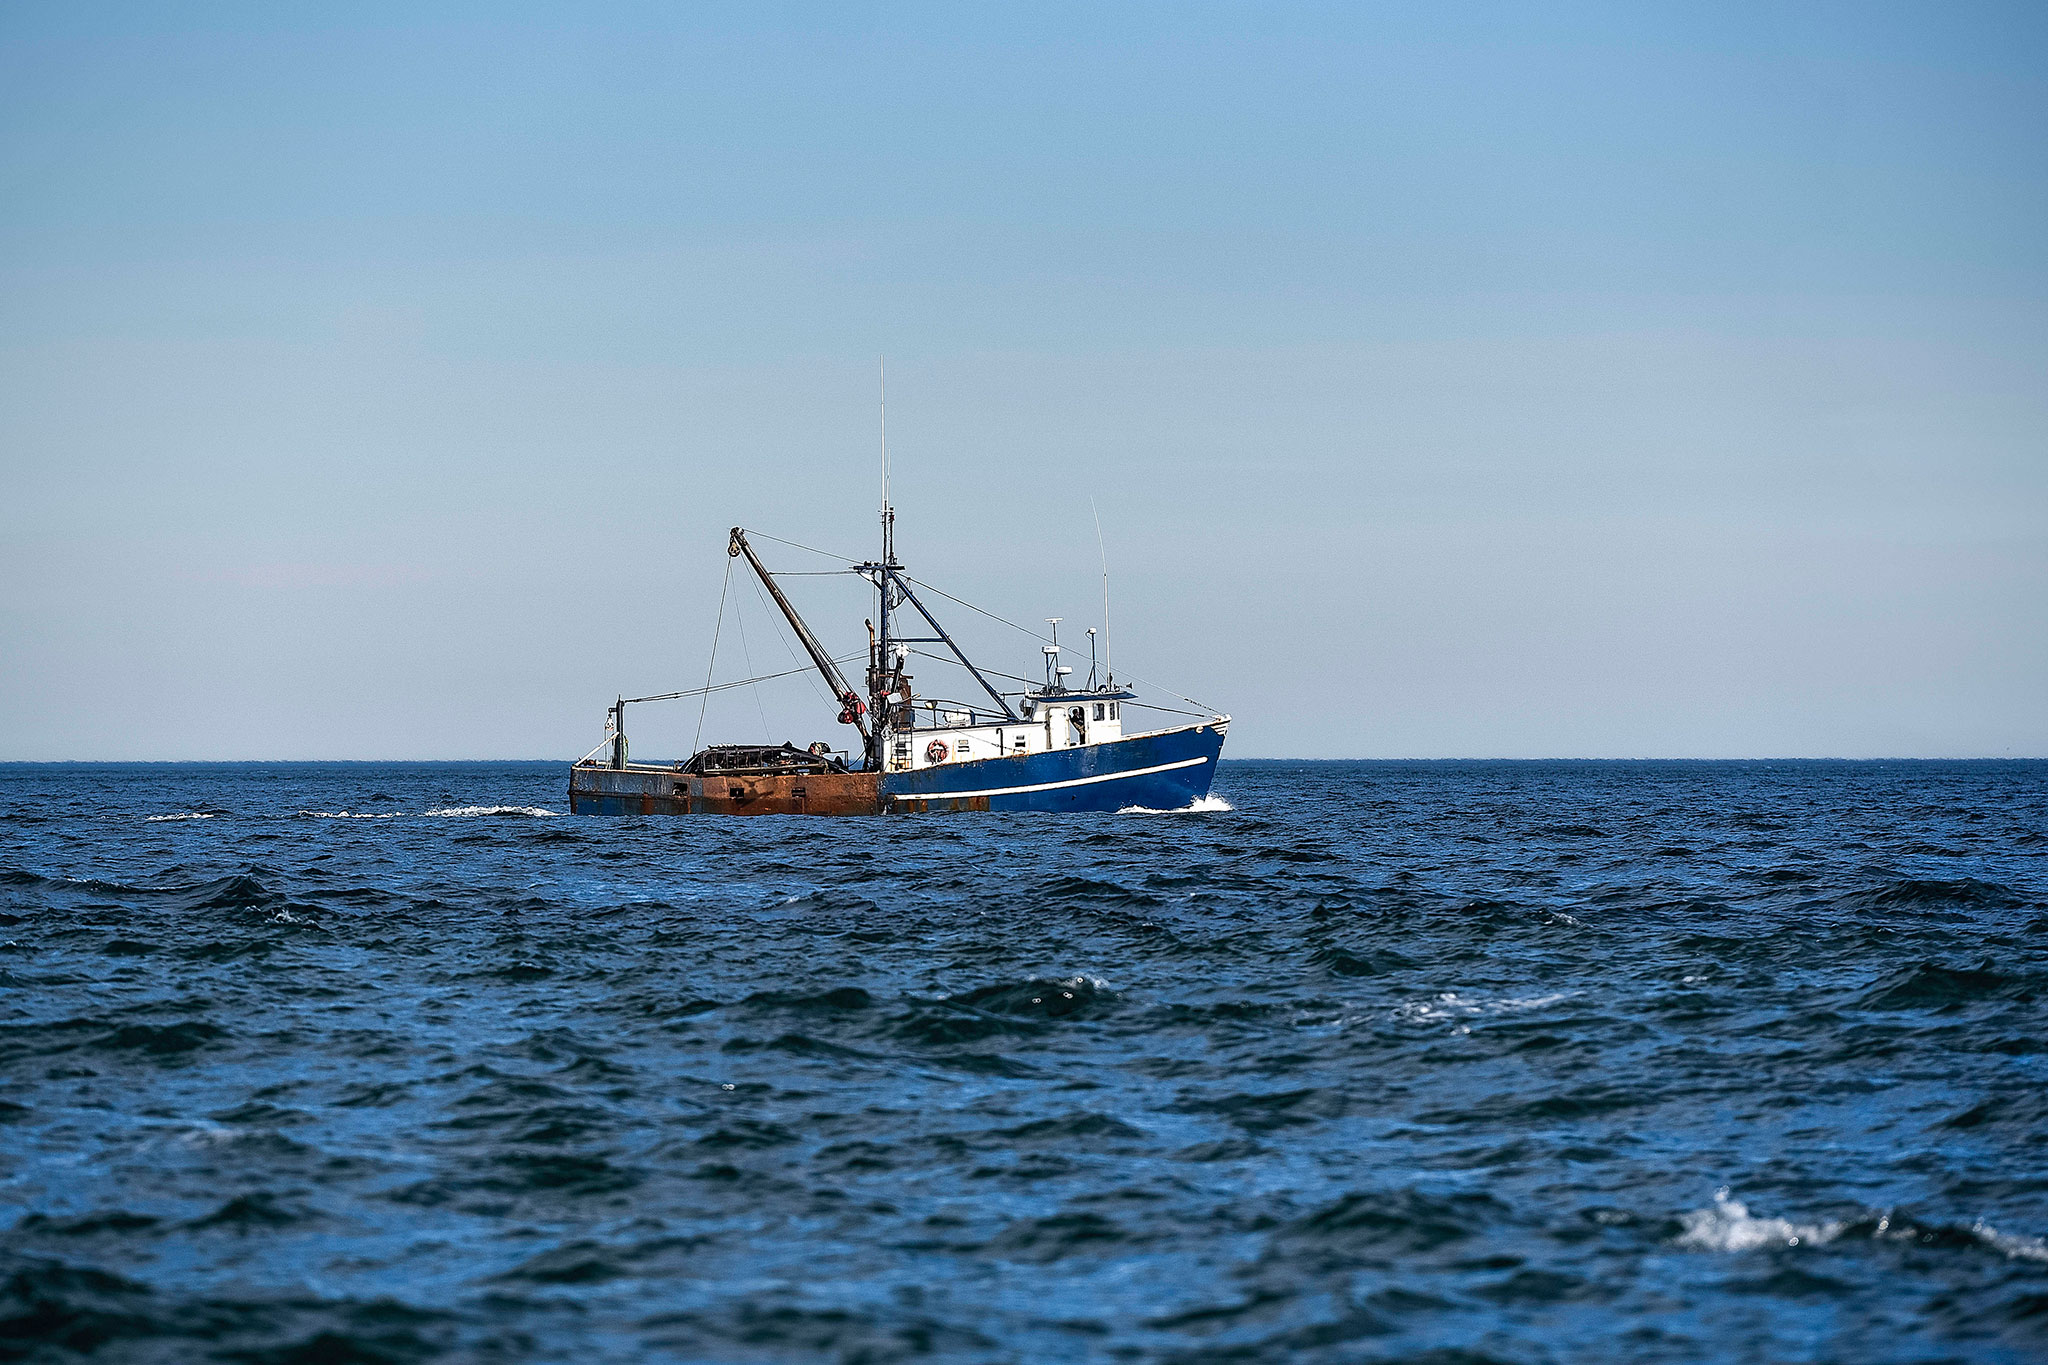 Illegal Fishing Possibly Identified by Ships That 